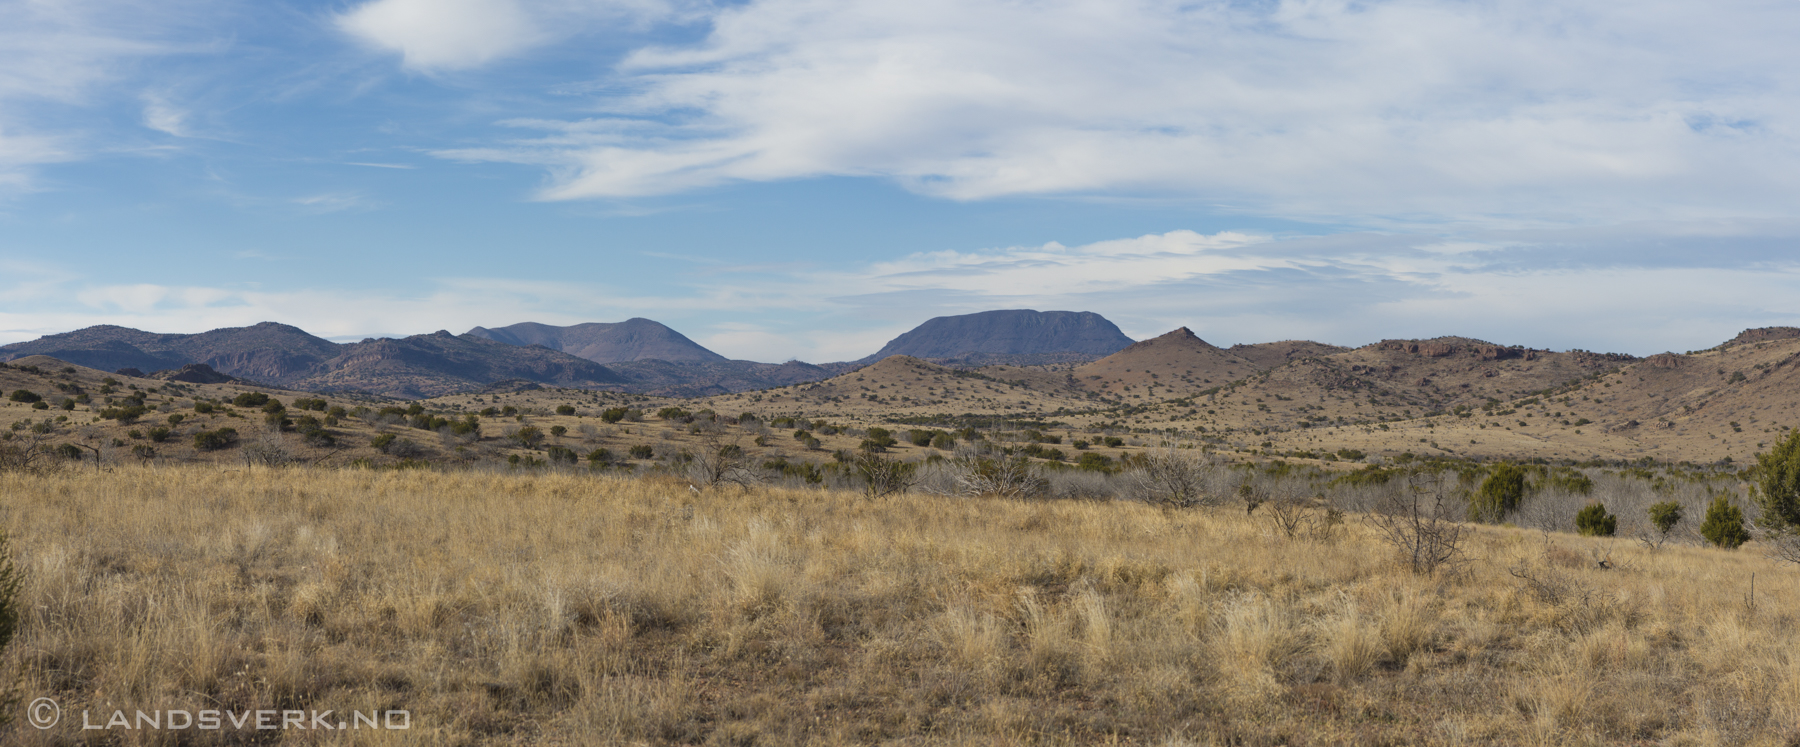 Somewhere in West Texas driving to Marfa. 

(Canon EOS 5D Mark III / Canon EF 24-70mm f/2.8 L USM